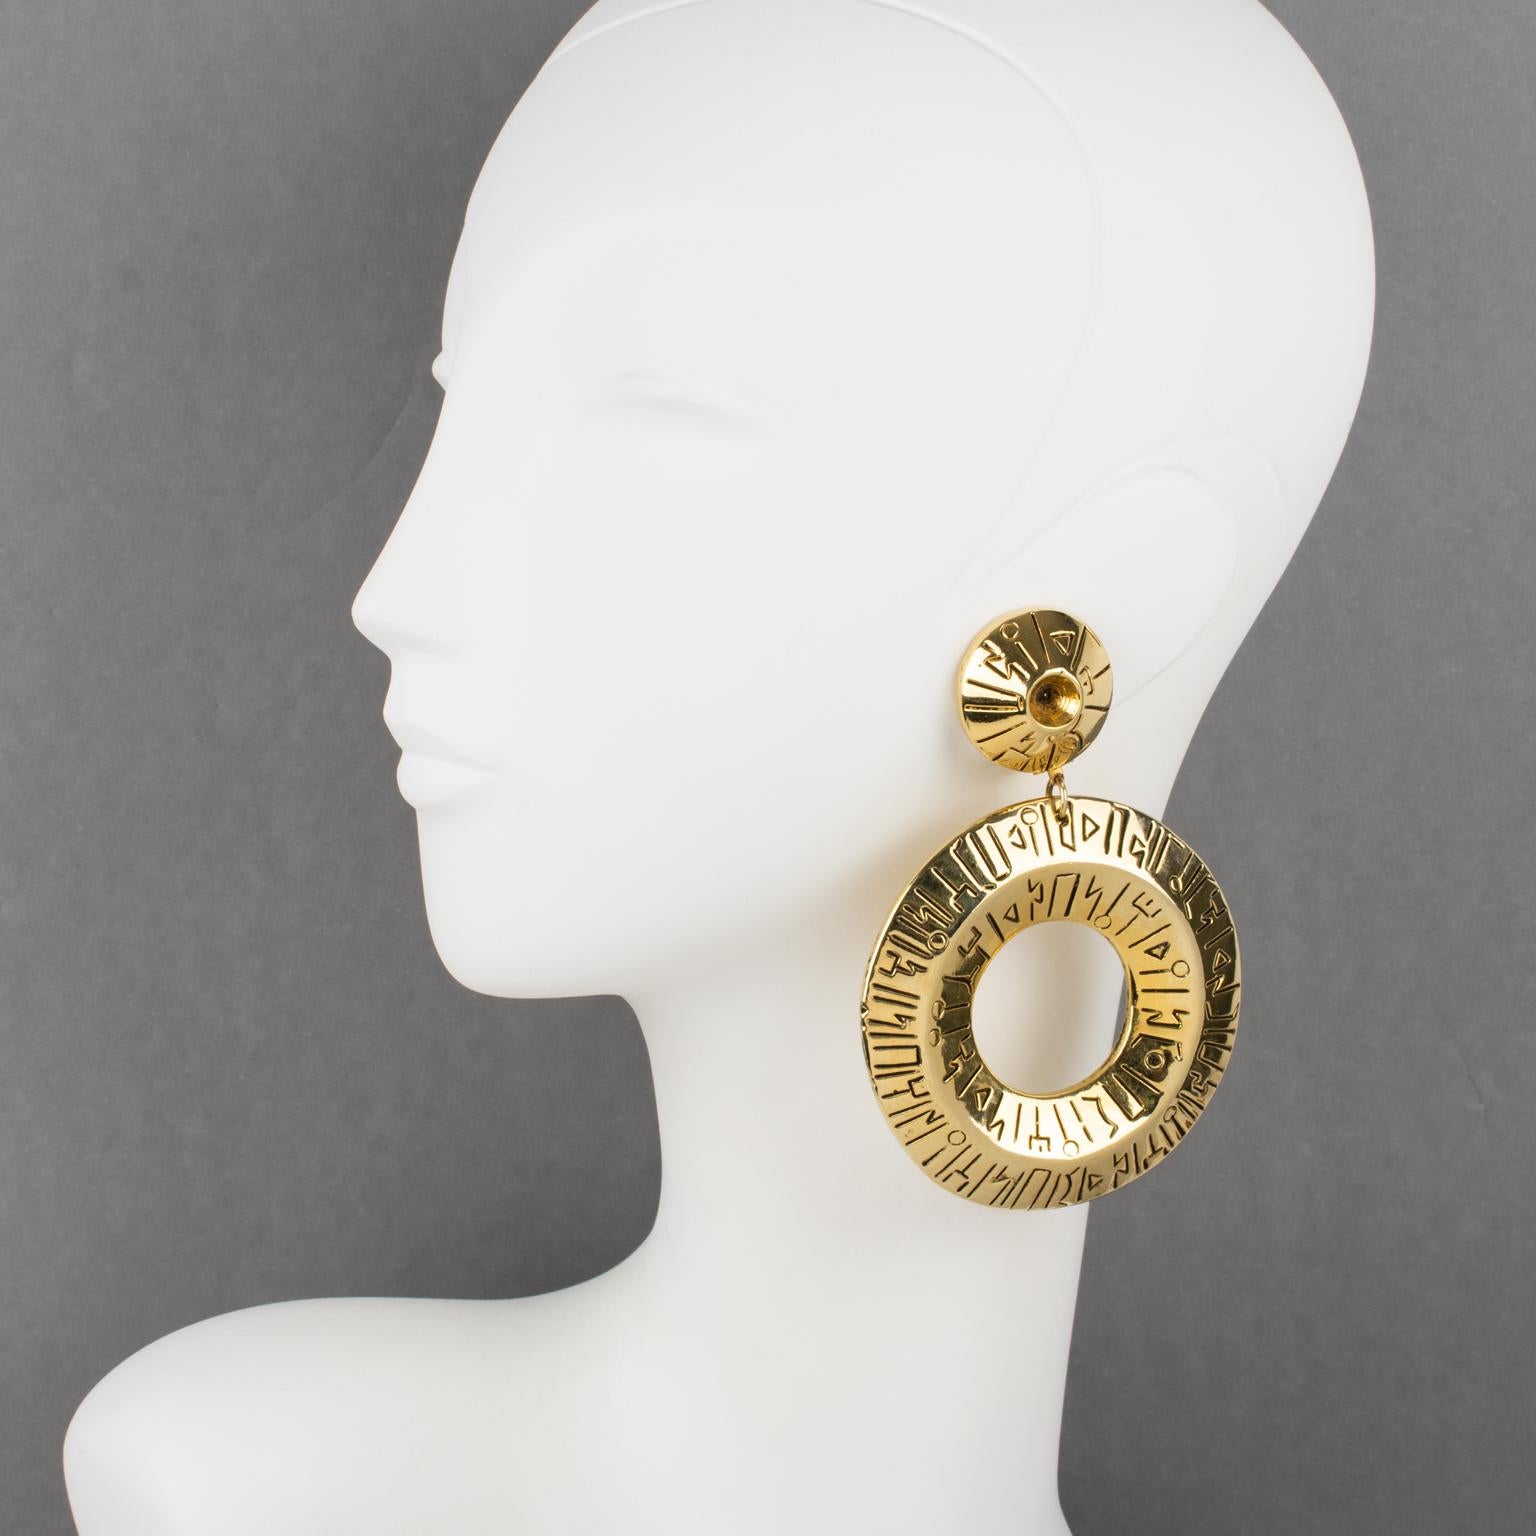 Stunning oversized Francoise Montague Paris resin clip-on earrings designed in the 1980s. 
A dangle shape features a massive gilt metal coating resin donut with ethnic carving. 
Shiny gold color with black contrast carved inscriptions. There is no